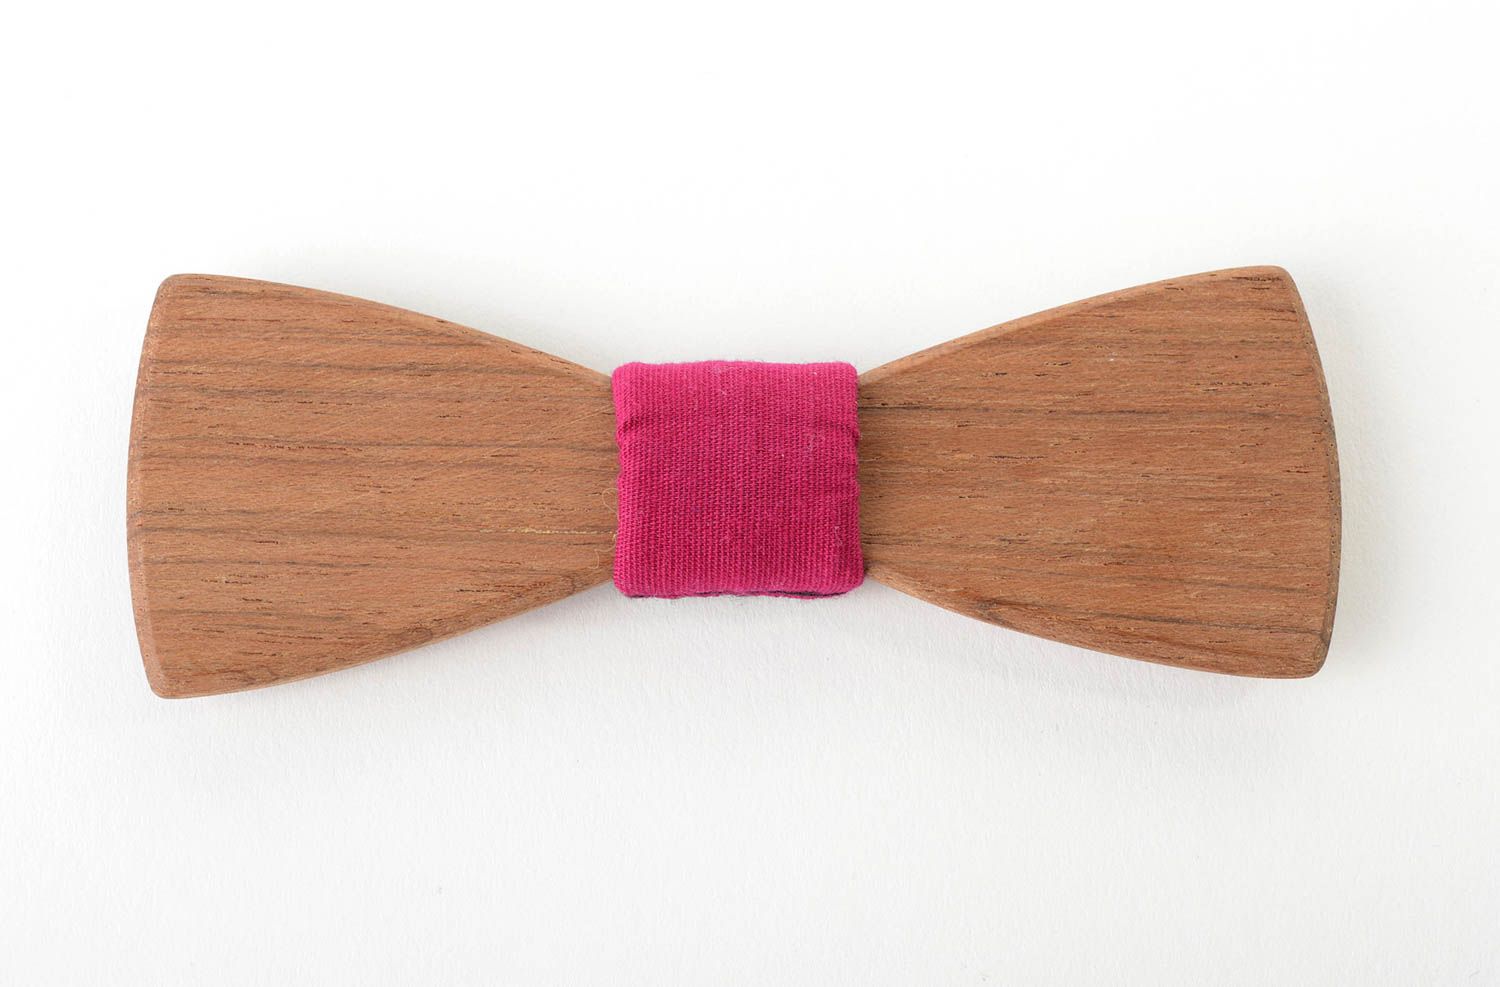 Handmade bow tie for men wood bow tie wooden bow tie accessories for men photo 4